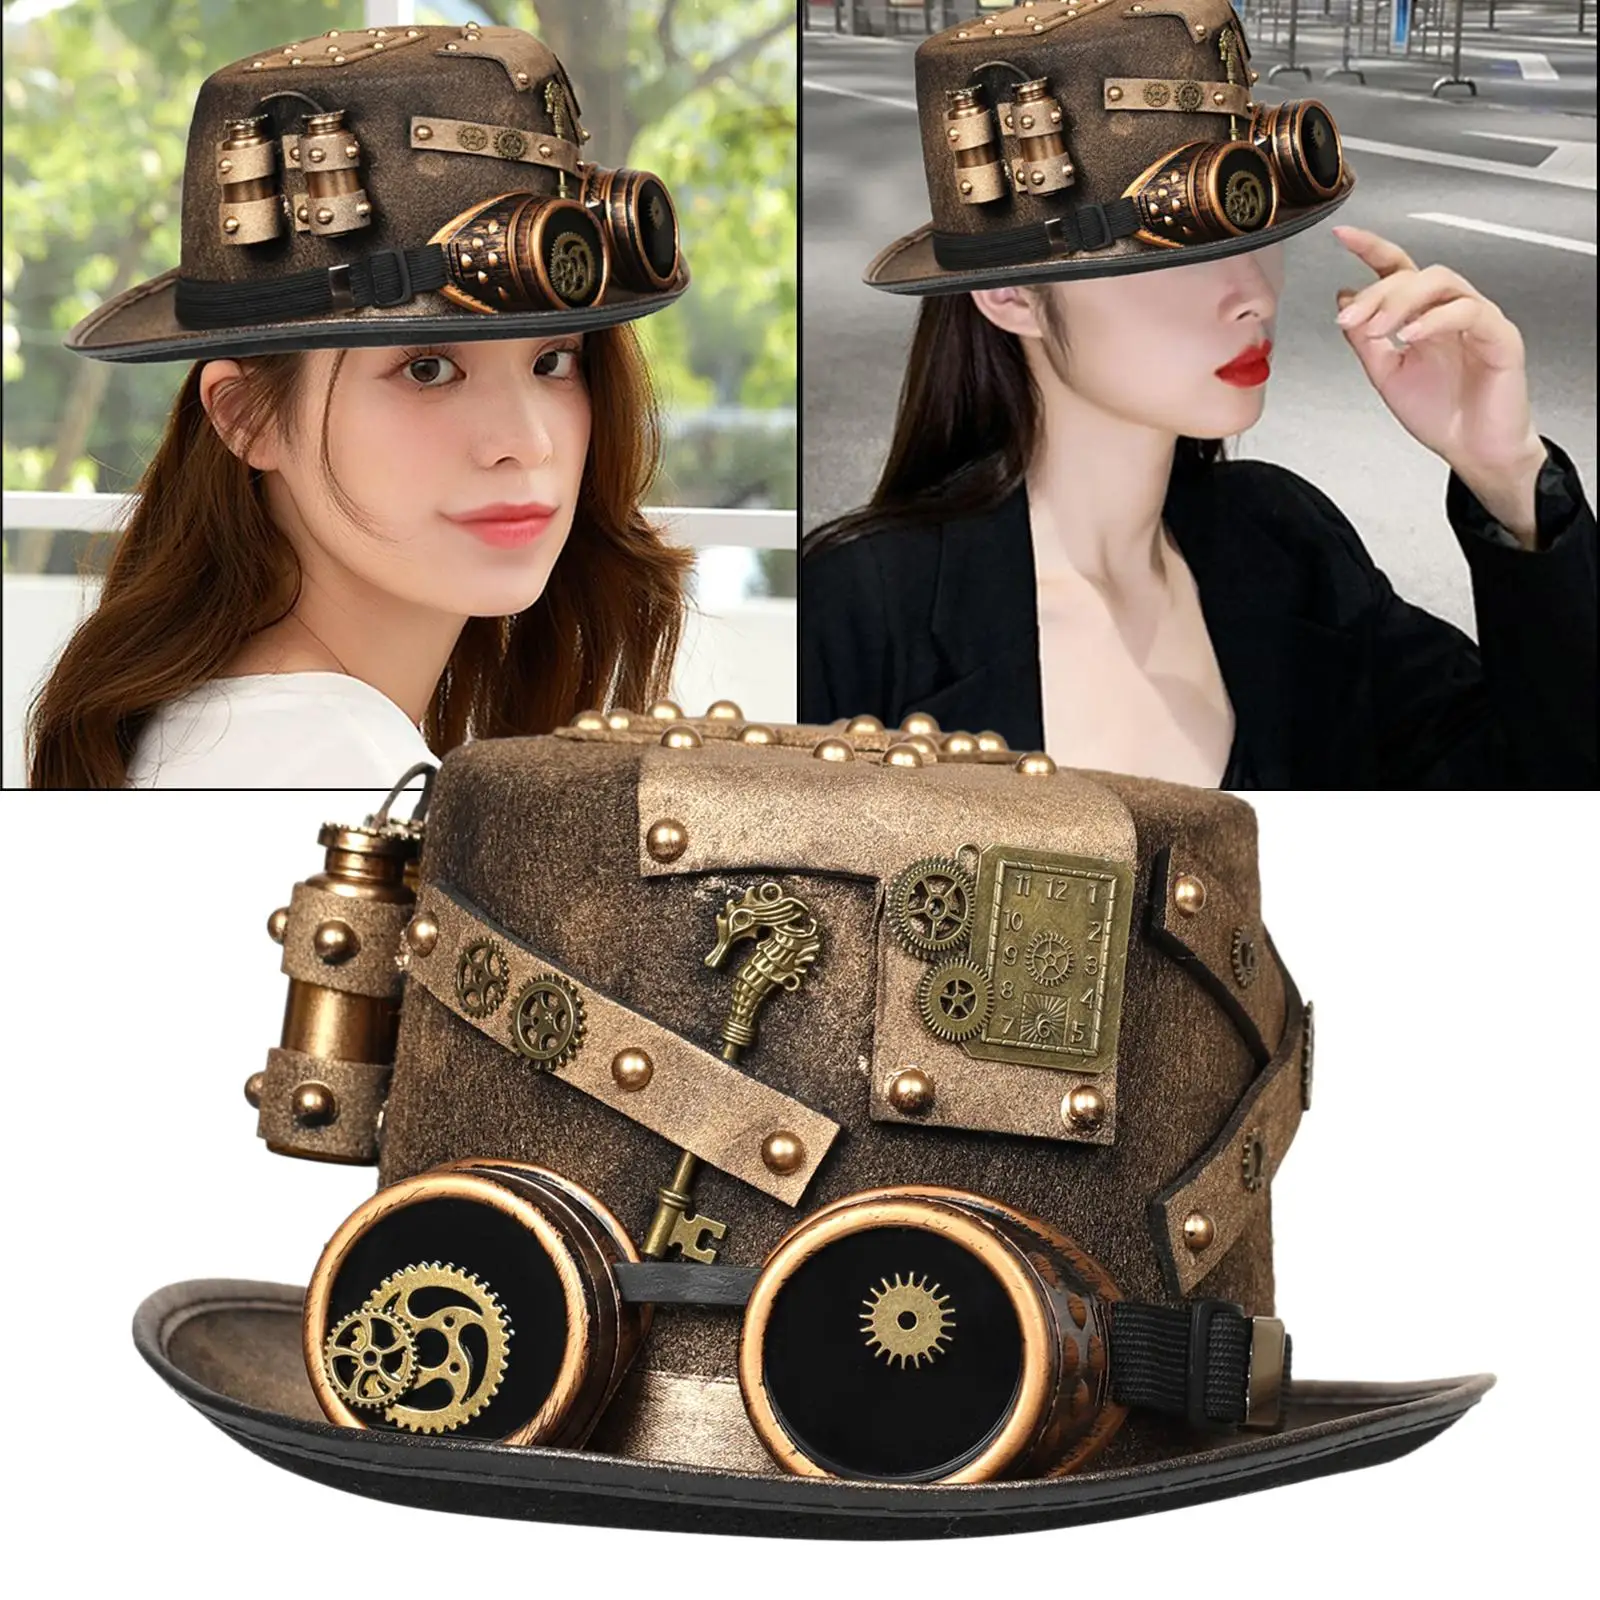 Steampunk Hats, Hats Dance Hat Head Wear Costume Accessory for Cosplay Masquerade Theme Party Fancy Dress